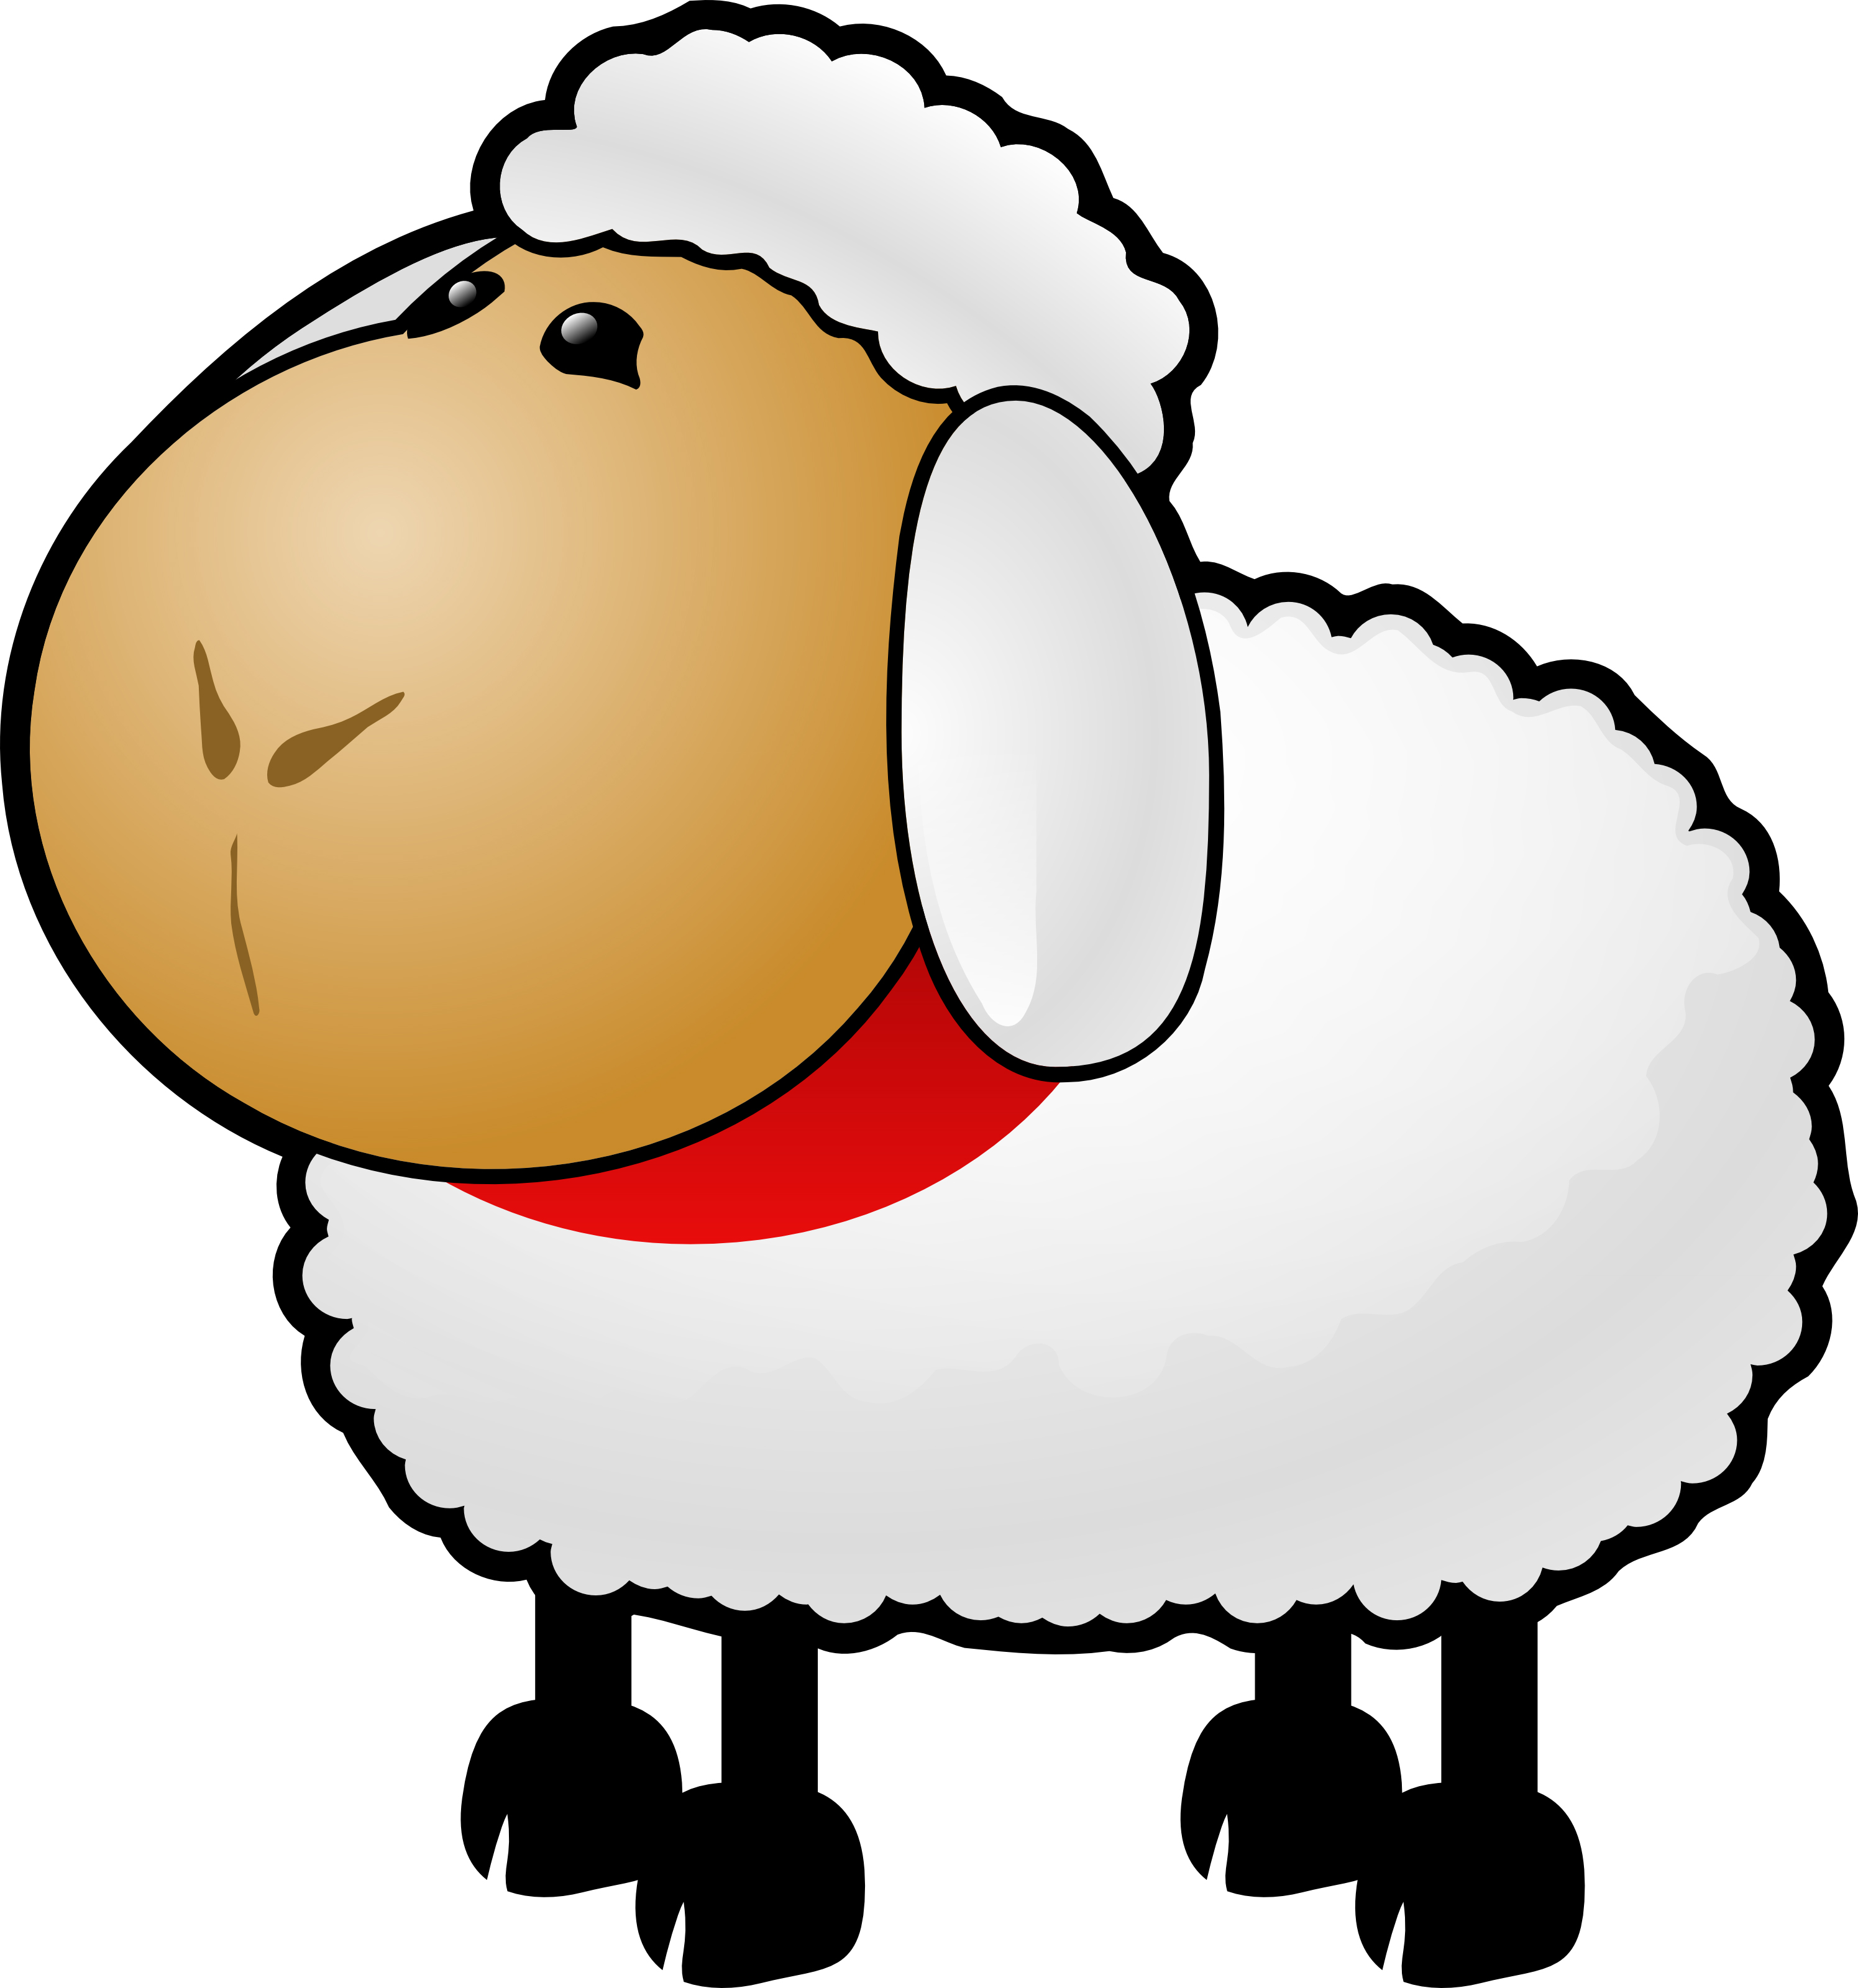 Pix For > One Sheep Clip Art